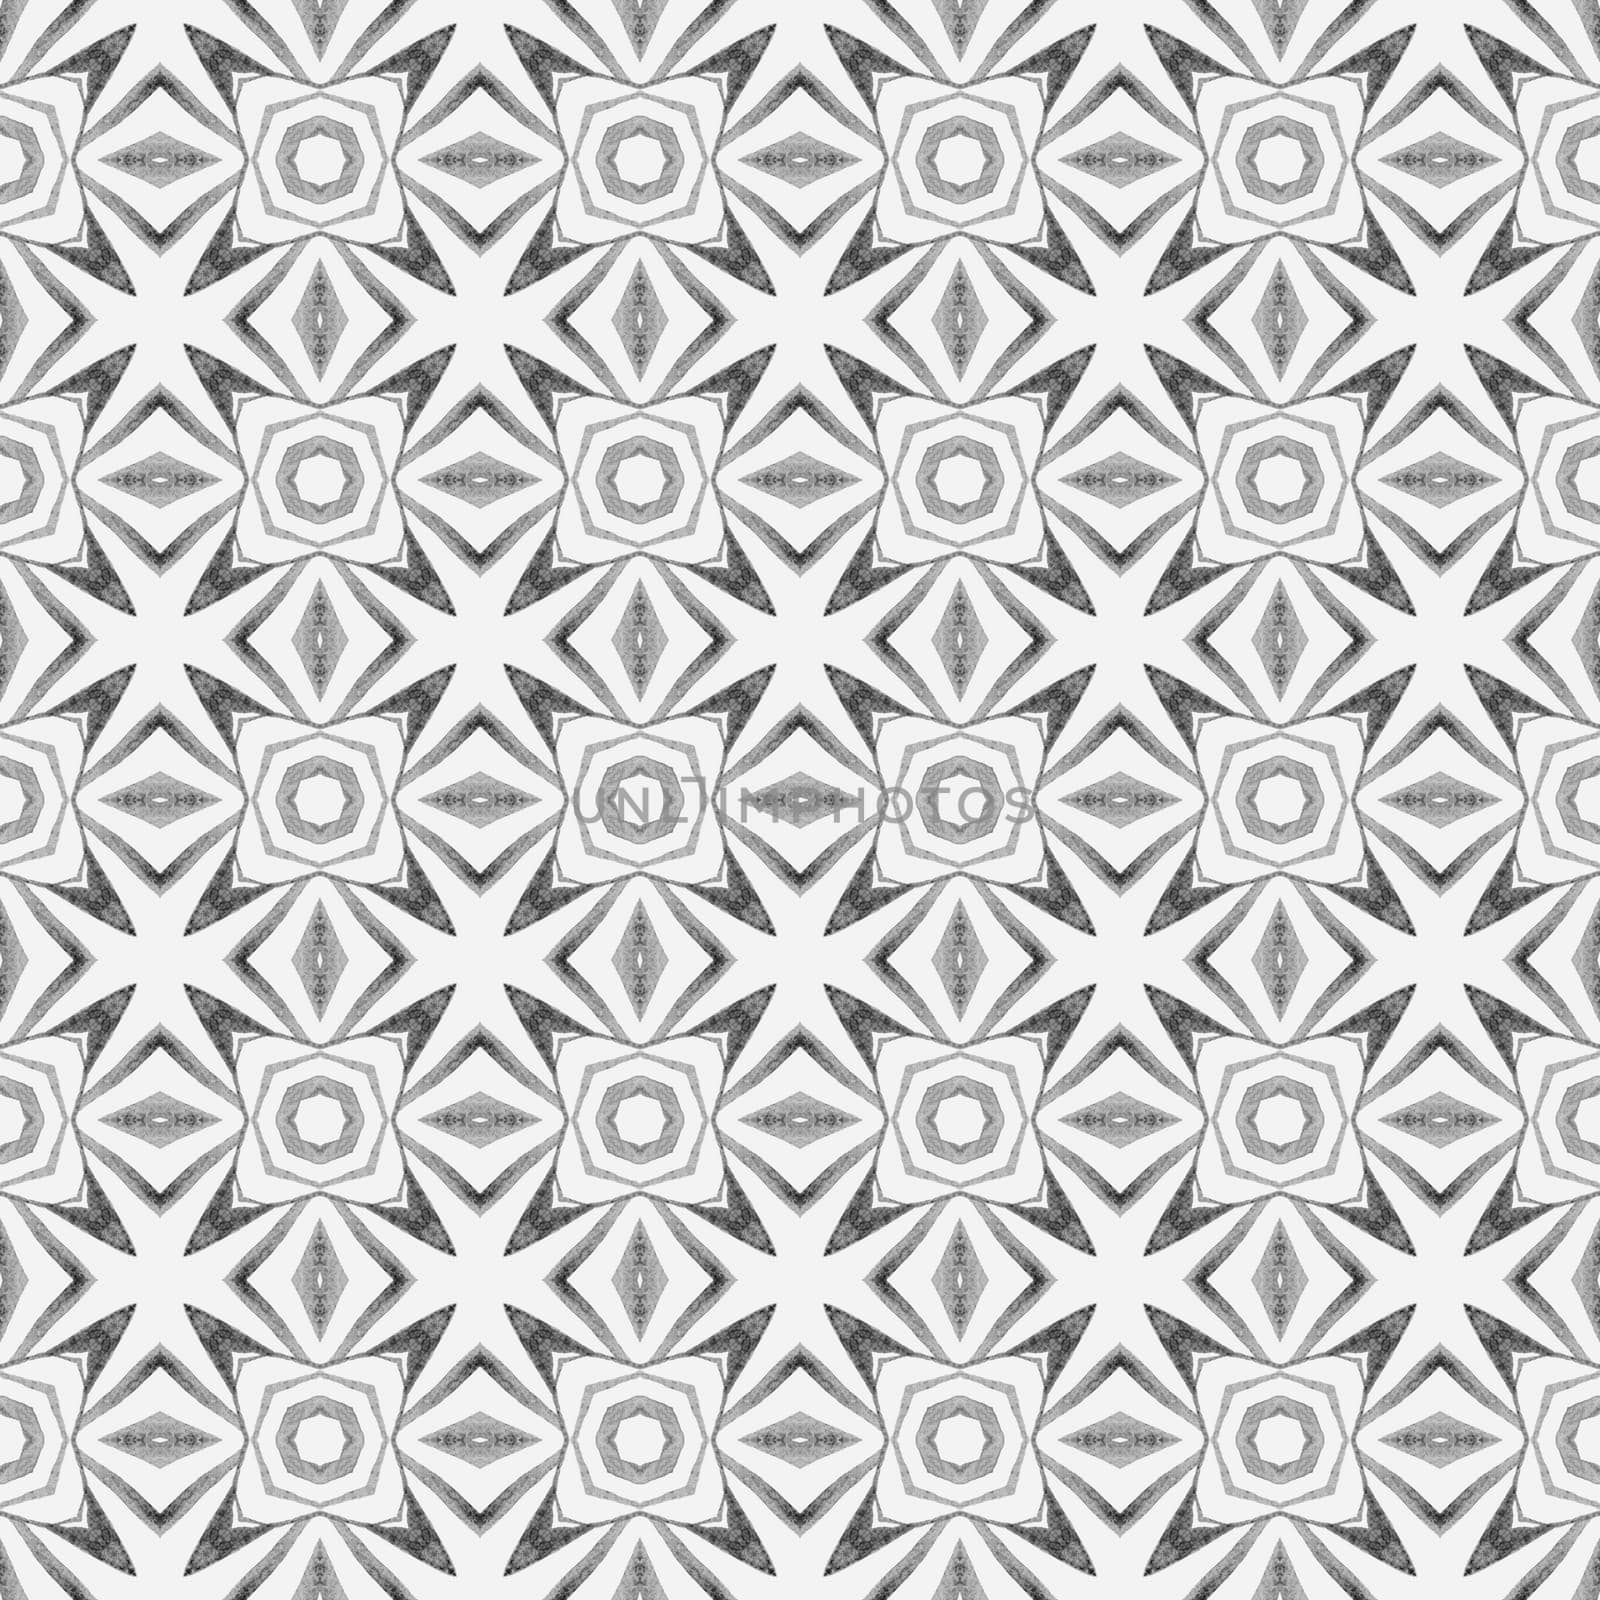 Textile ready great print, swimwear fabric, wallpaper, wrapping. Black and white unequaled boho chic summer design. Hand drawn green mosaic seamless border. Mosaic seamless pattern.